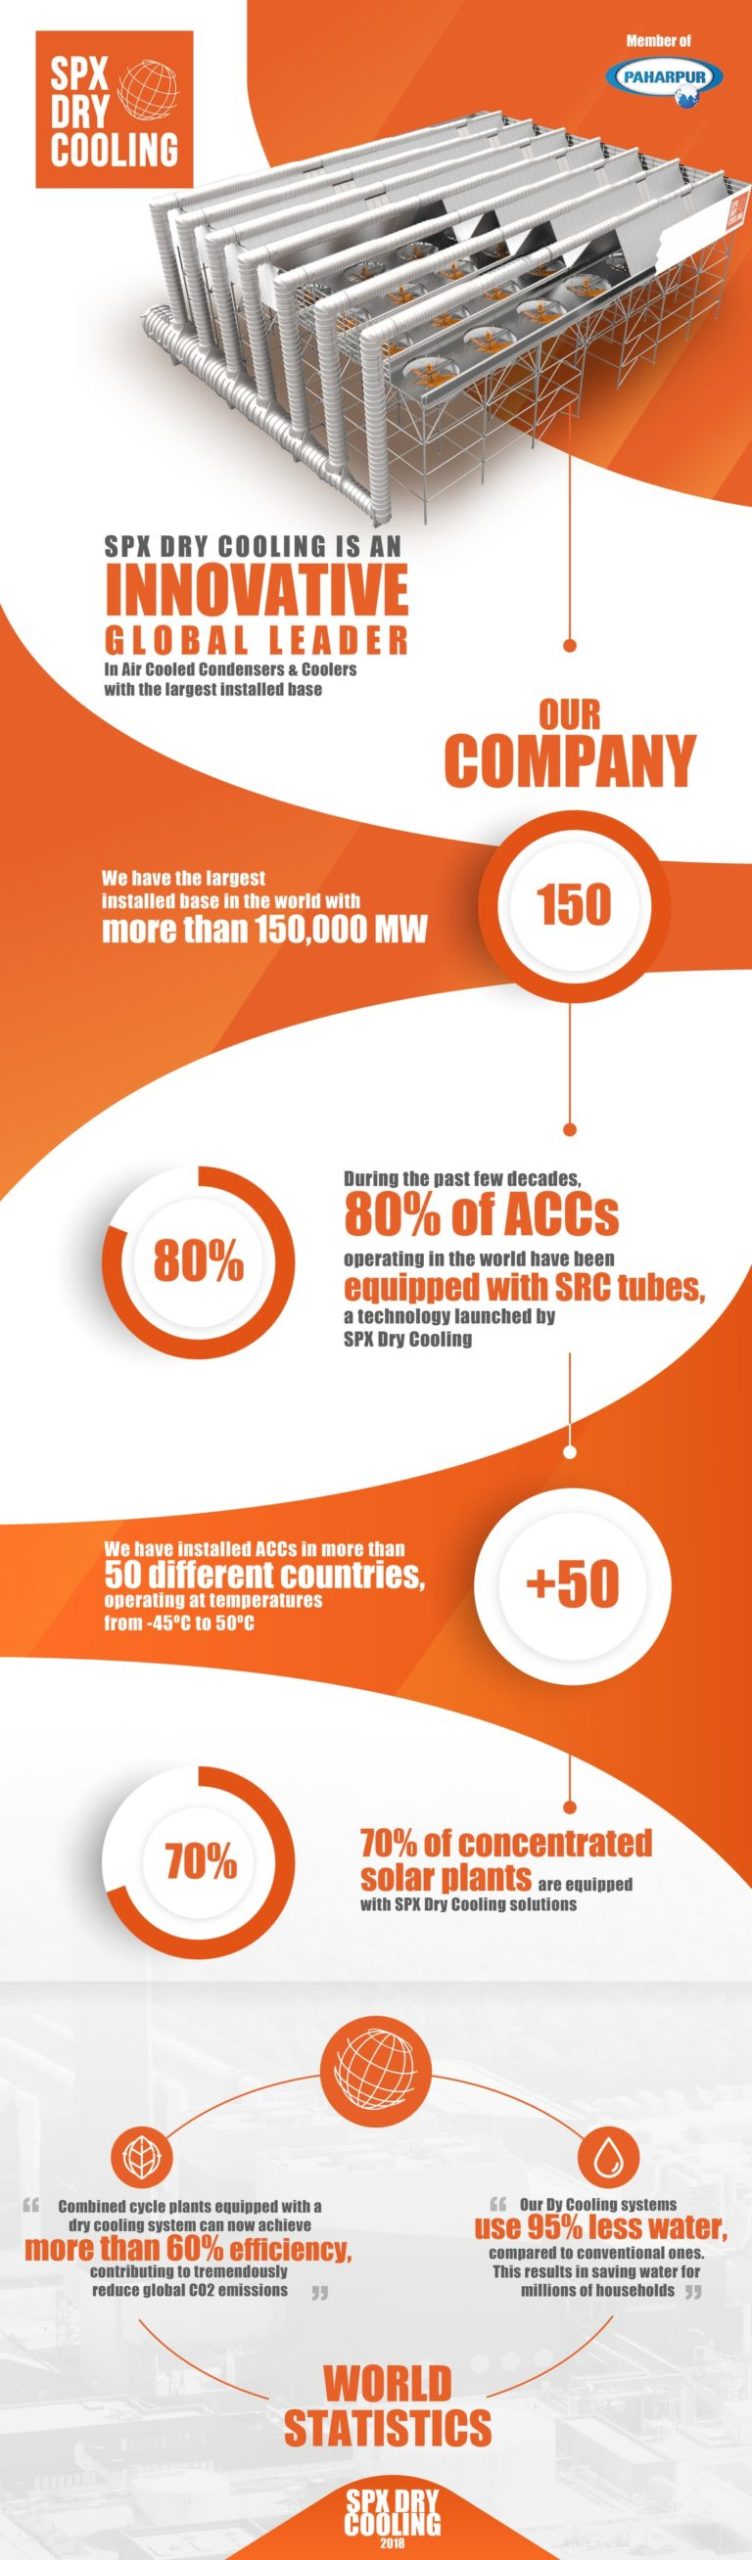 infographic-spx-dry-cooling-768x2616